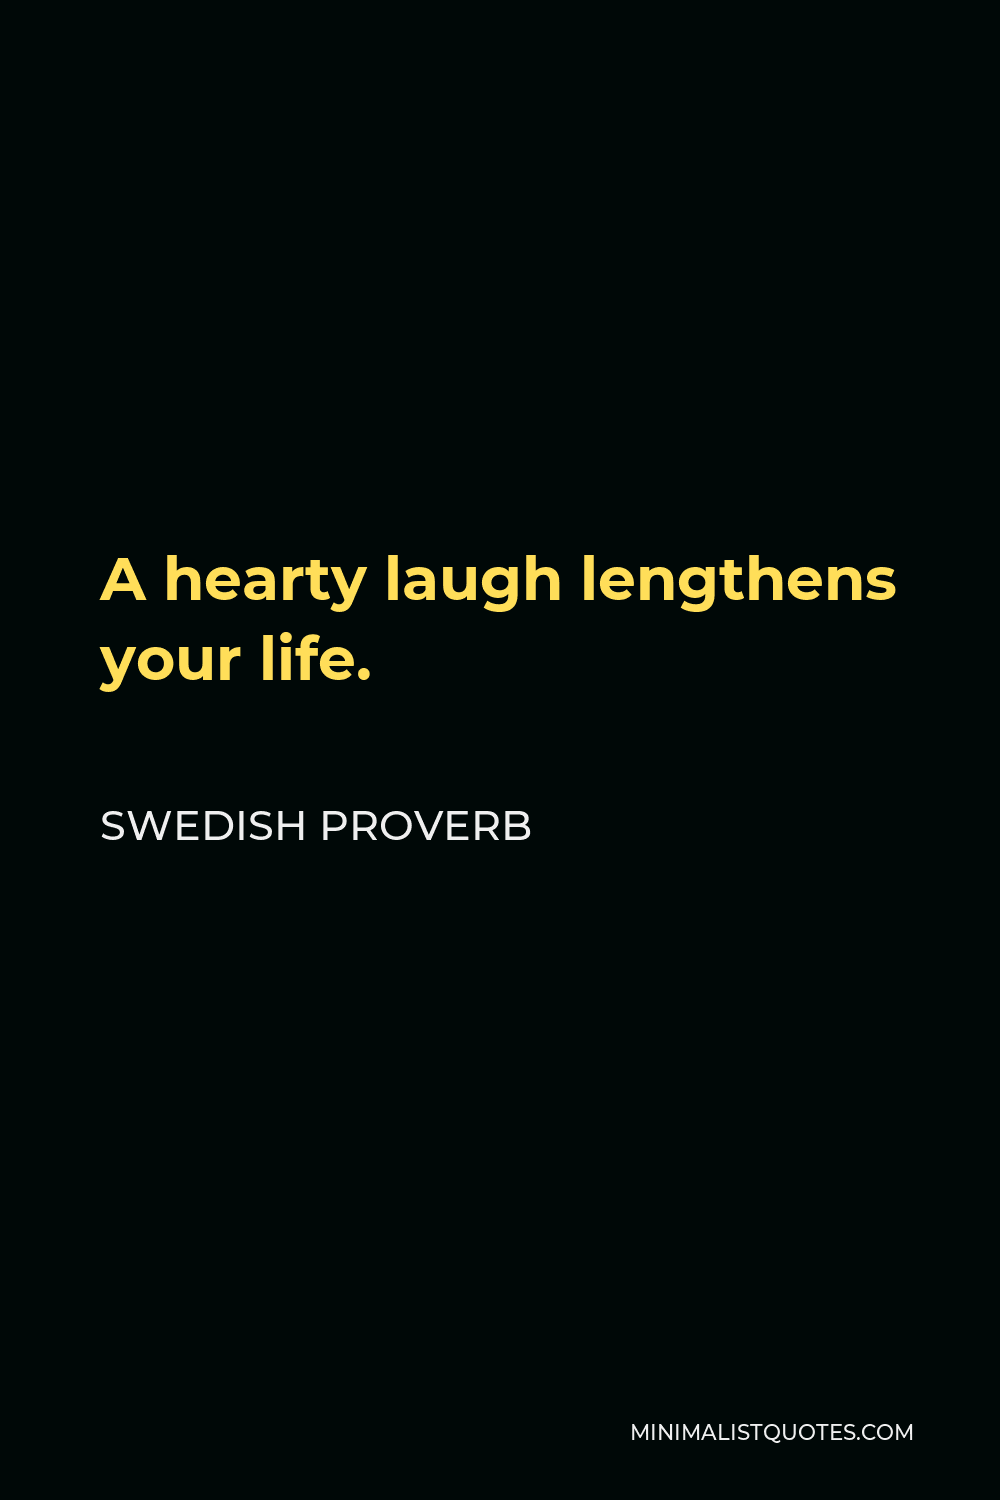 Swedish Proverb Quote - A hearty laugh lengthens your life.